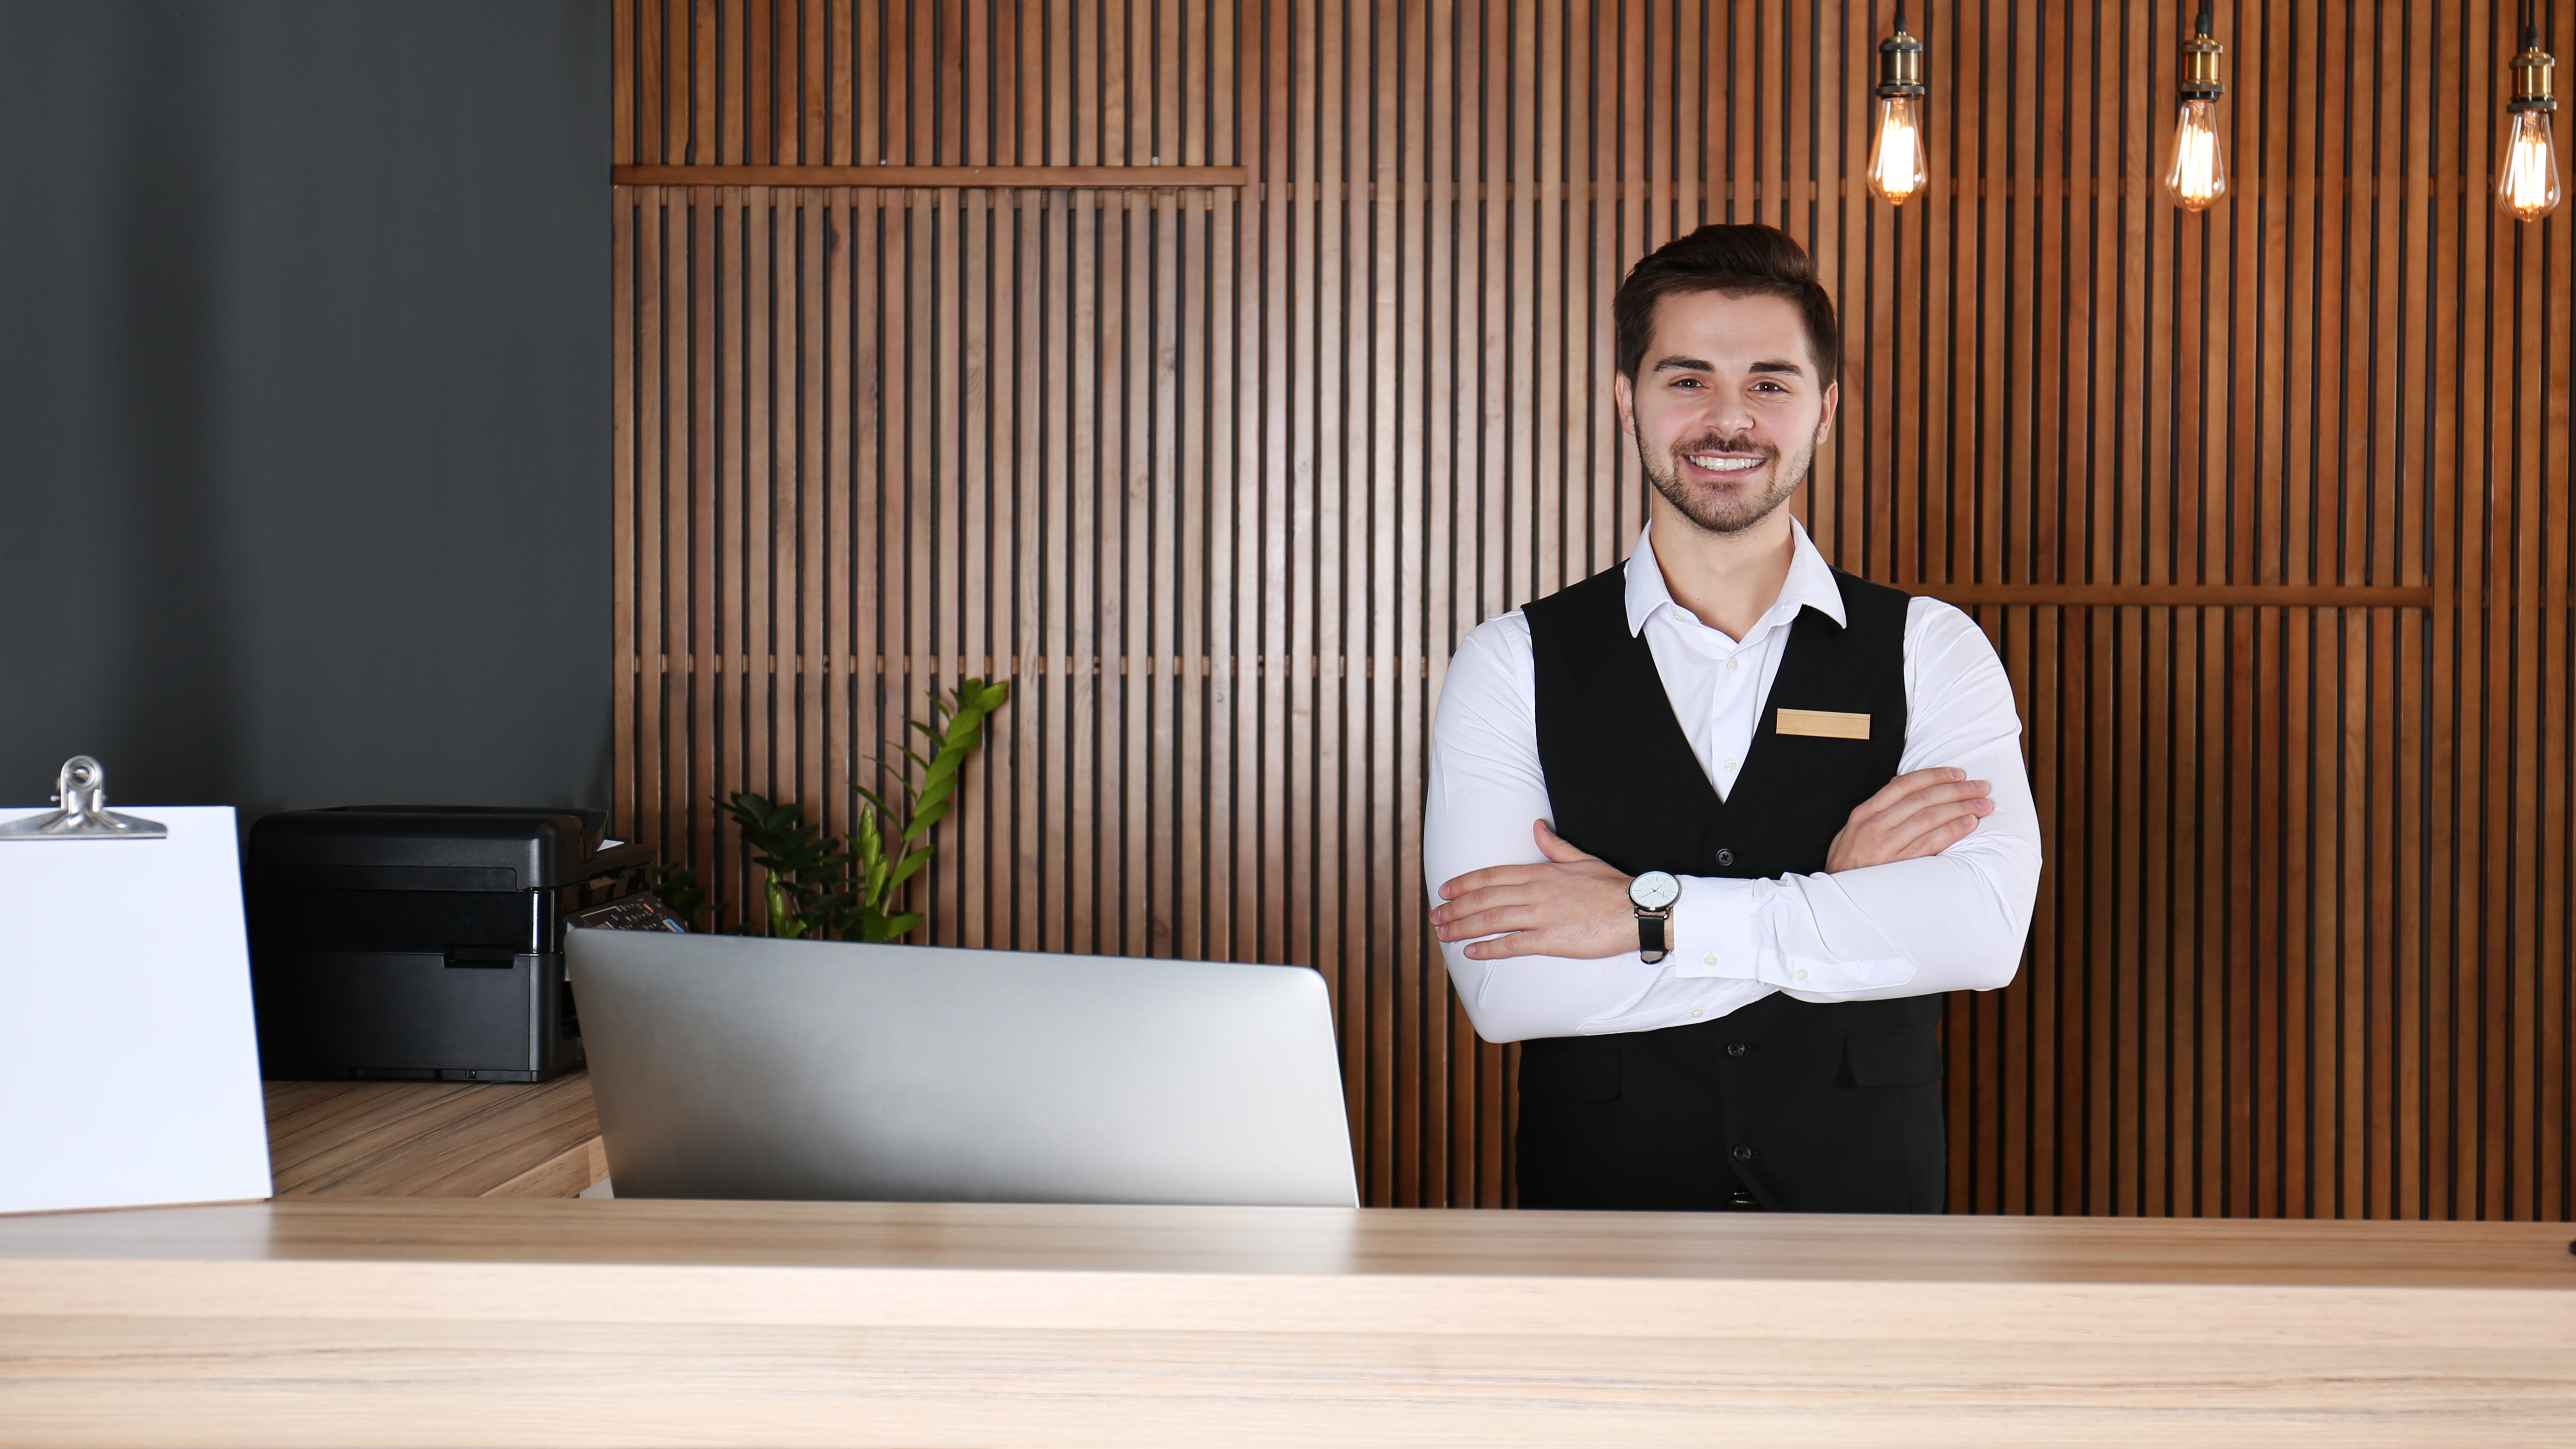 Dark-haired young man, smiling behind a reception desk